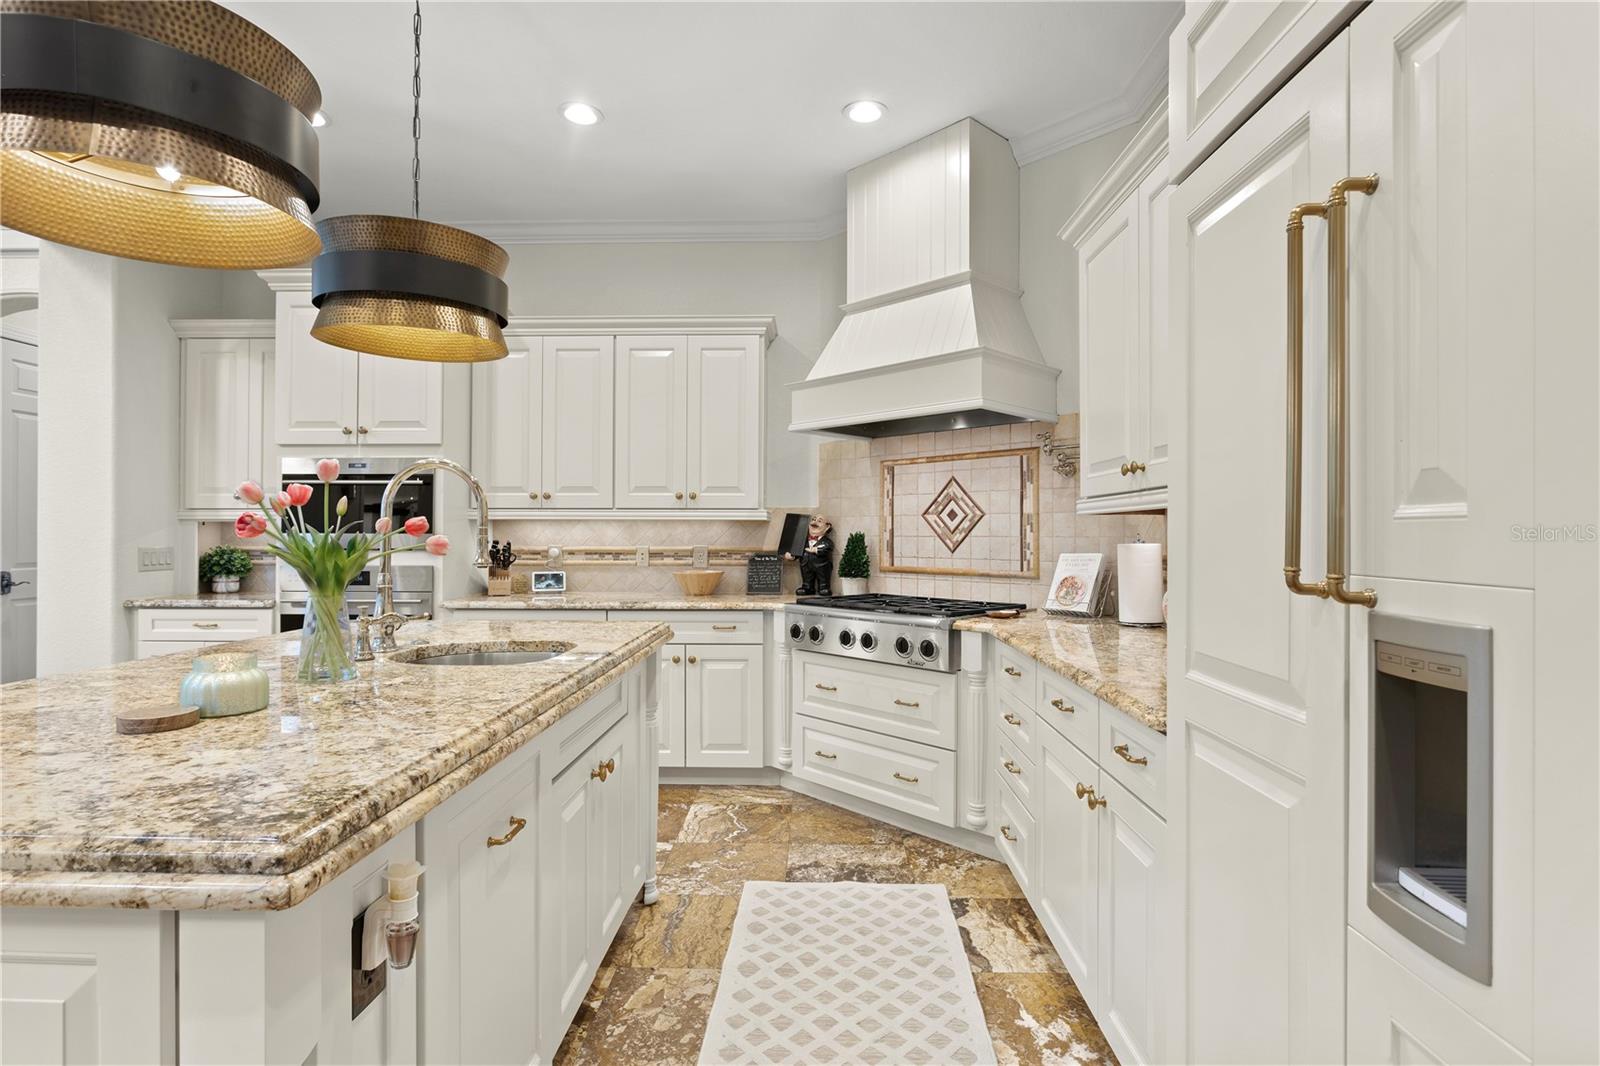 Stunning cabinetry, tiled backsplash, flooring & countertops! Built-in refrigerator, gas cooktop and four-drawer dishwashers!